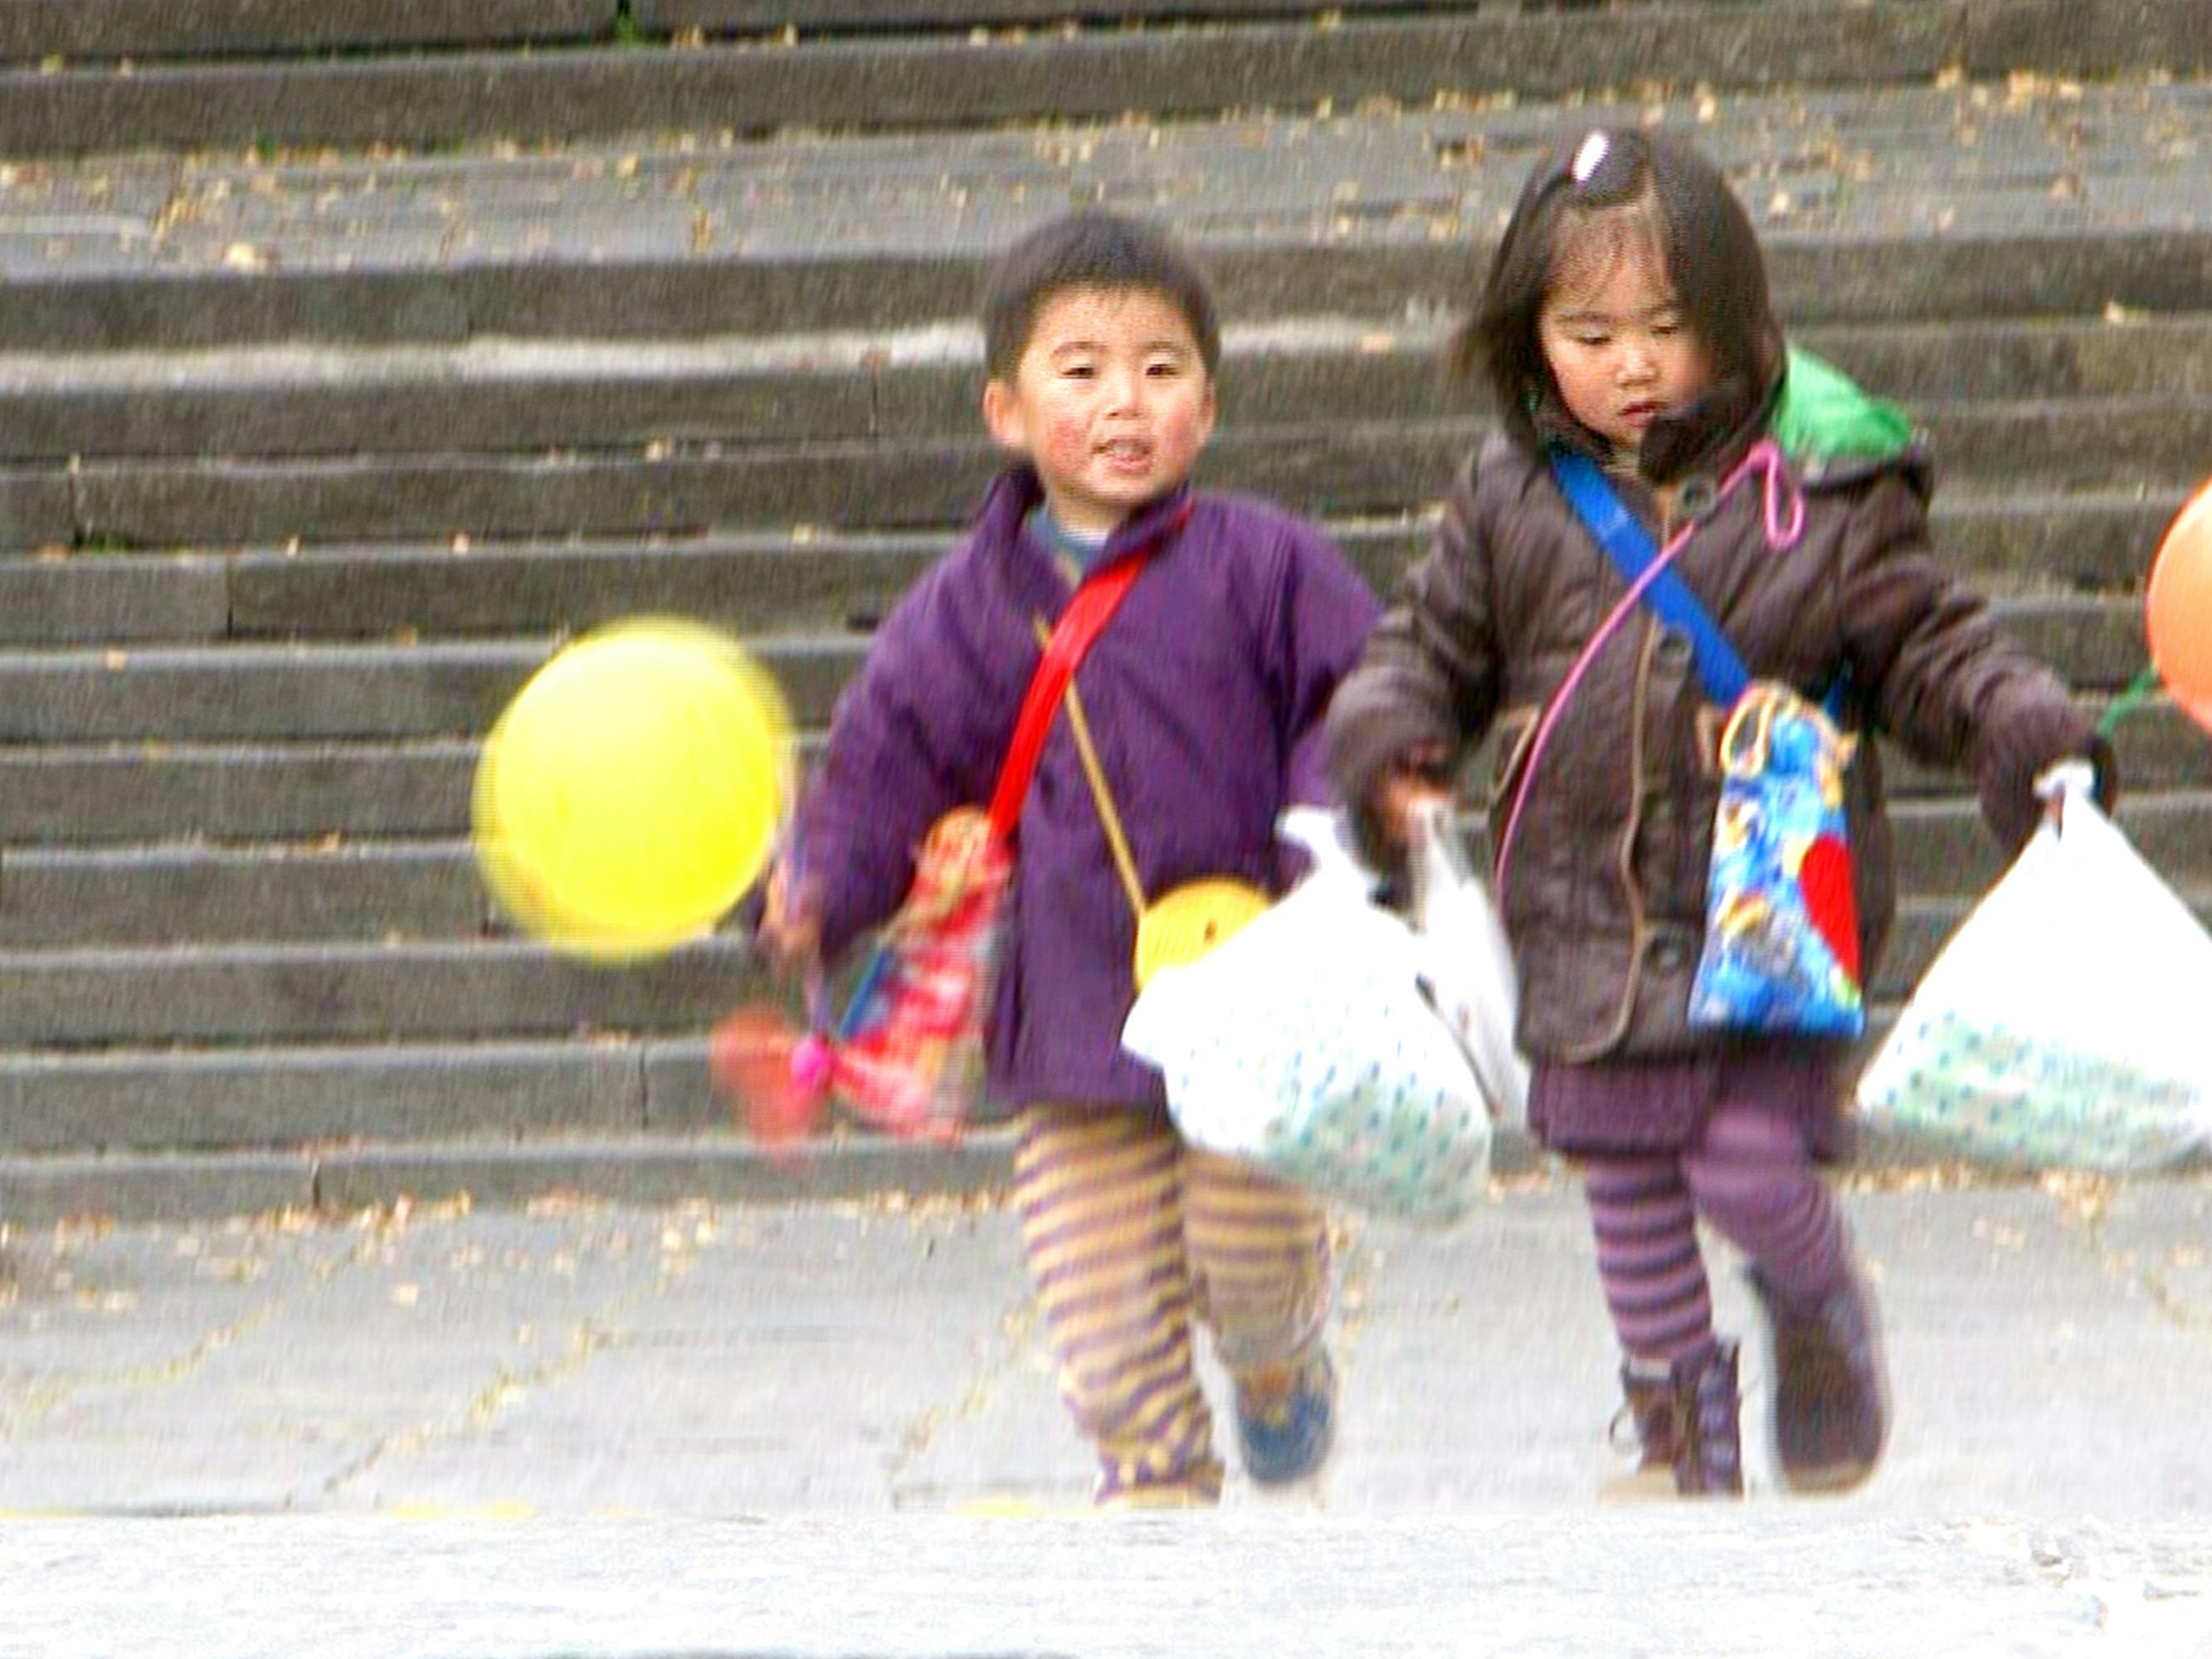 Naoki and Seina in Old Enough! hold plastic bags and carry balloons. They both wear striped pants.